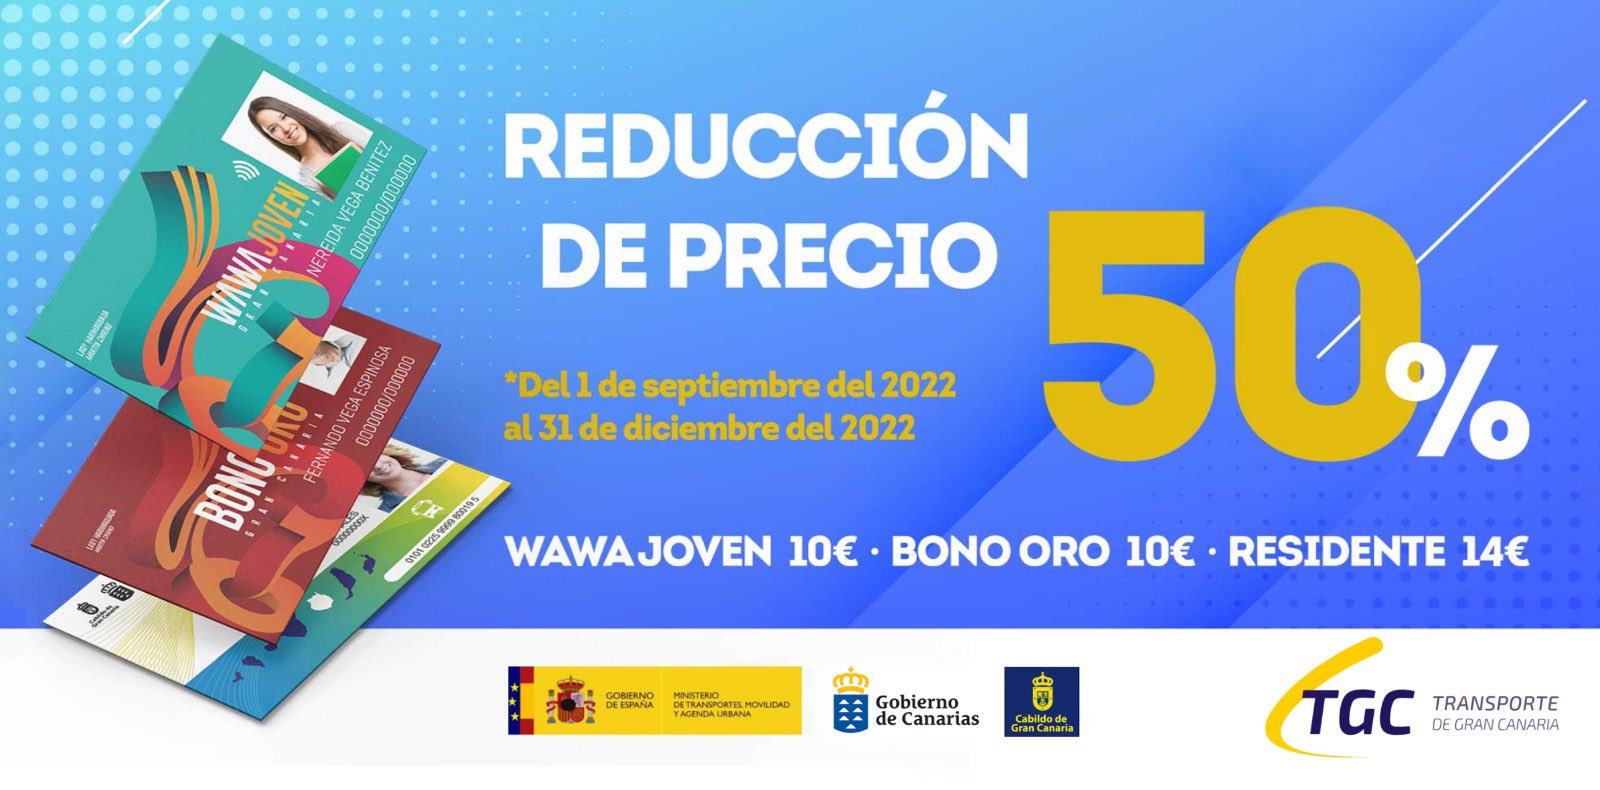 Price of bus passes discounted 50% for all Canary Islands’ residents